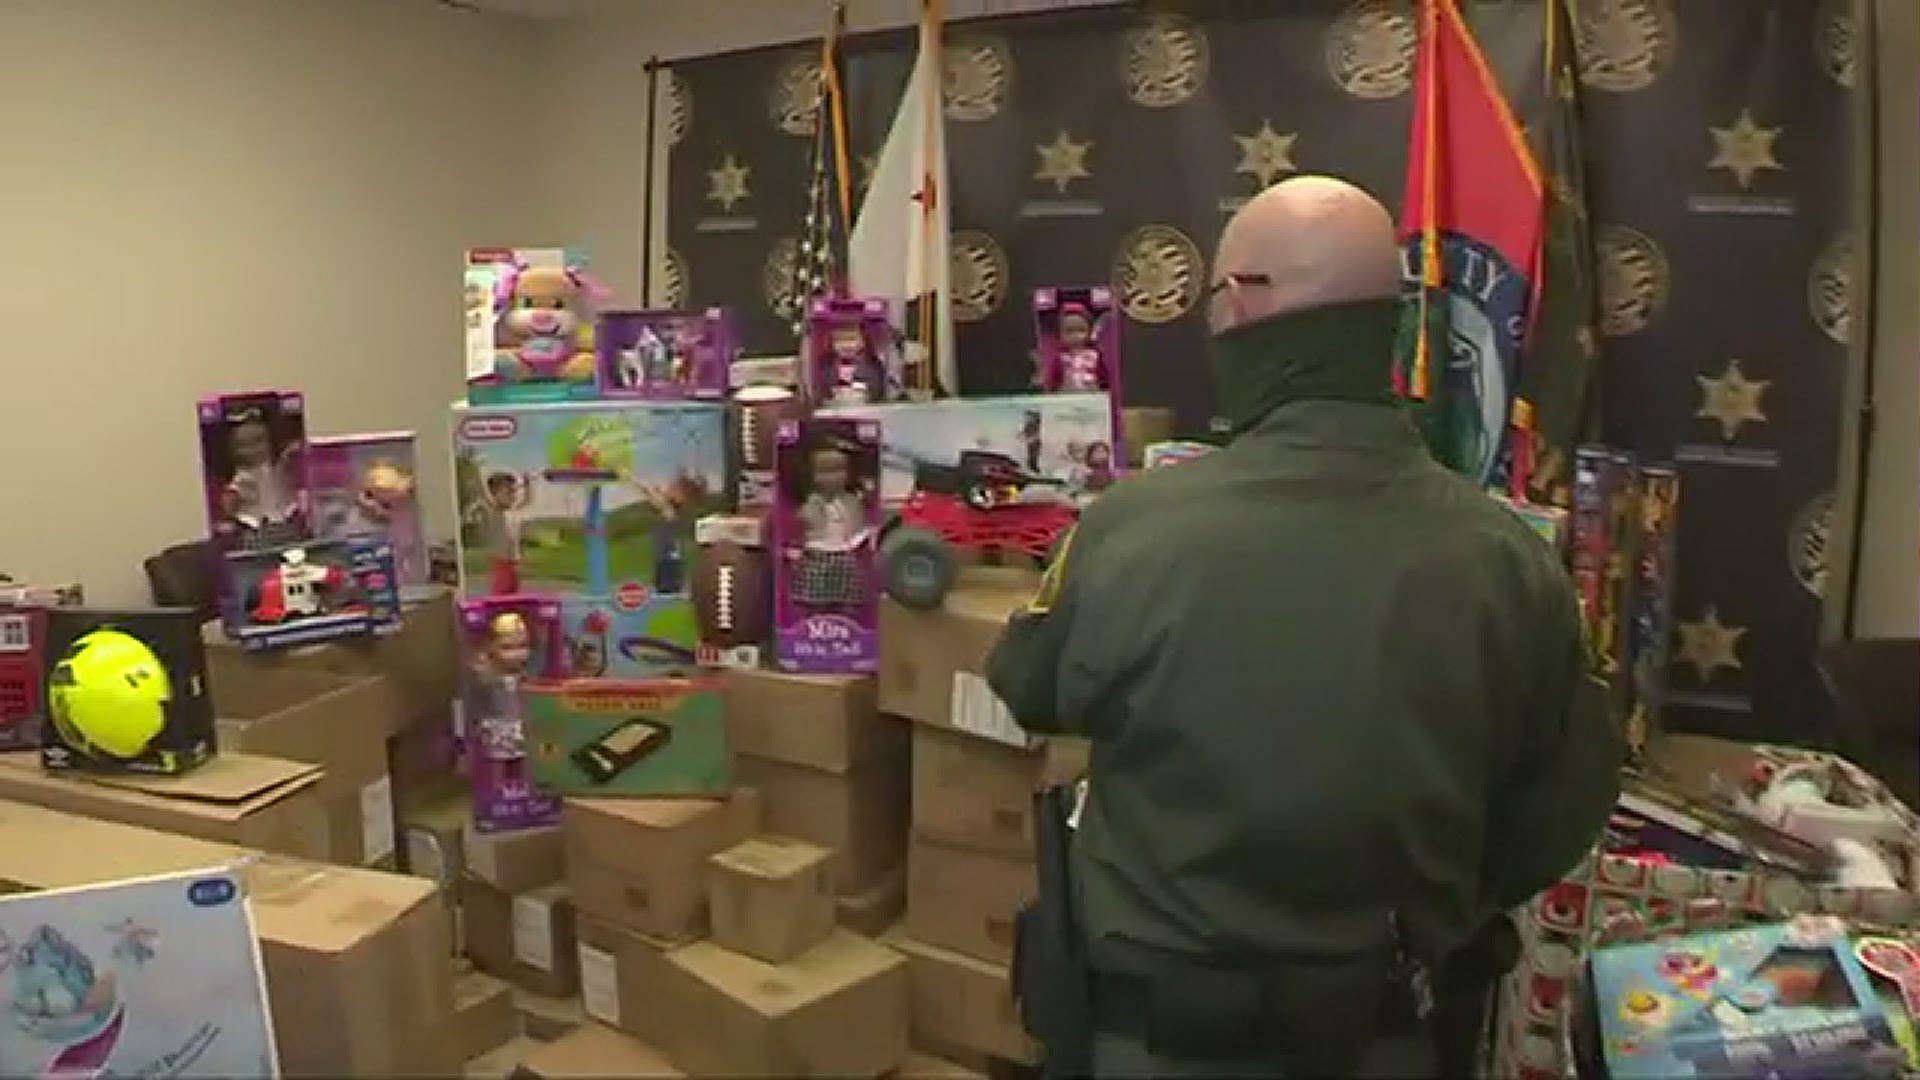 A California deputy is donating presents to the children's home that took him in as a baby.